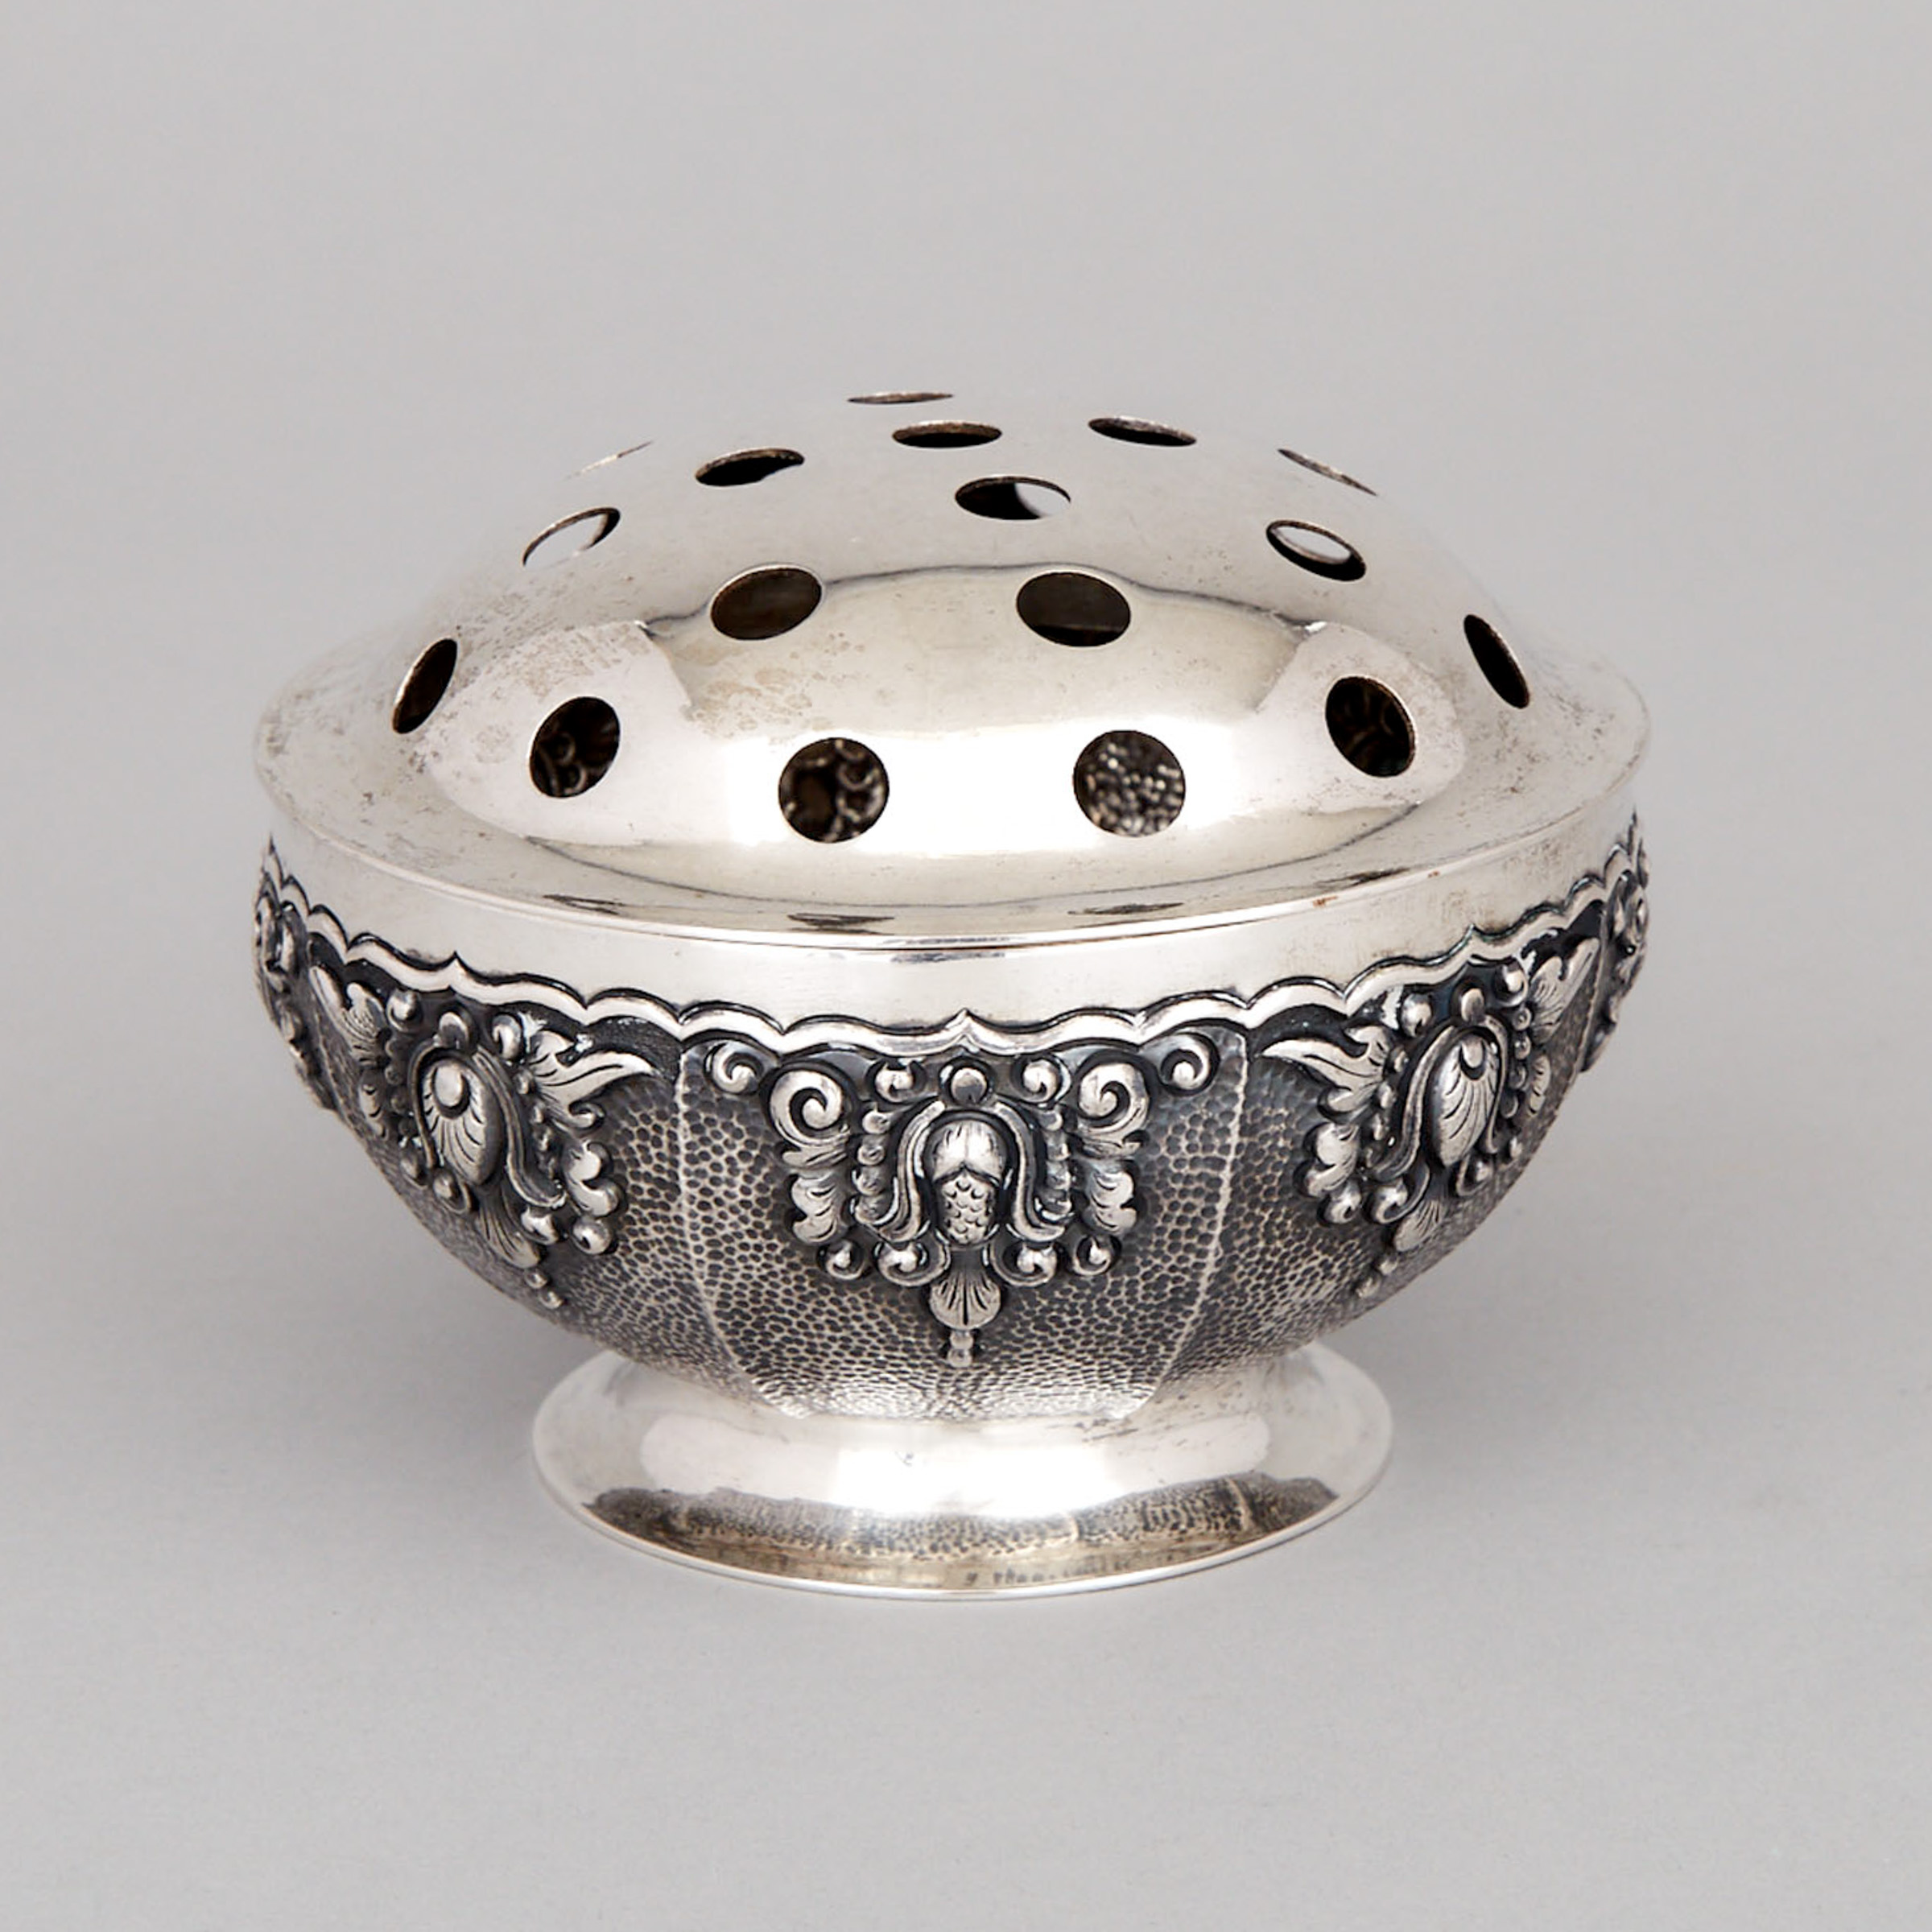 Indonesian Silver Incense Bowl with Cover, Java, 20th century